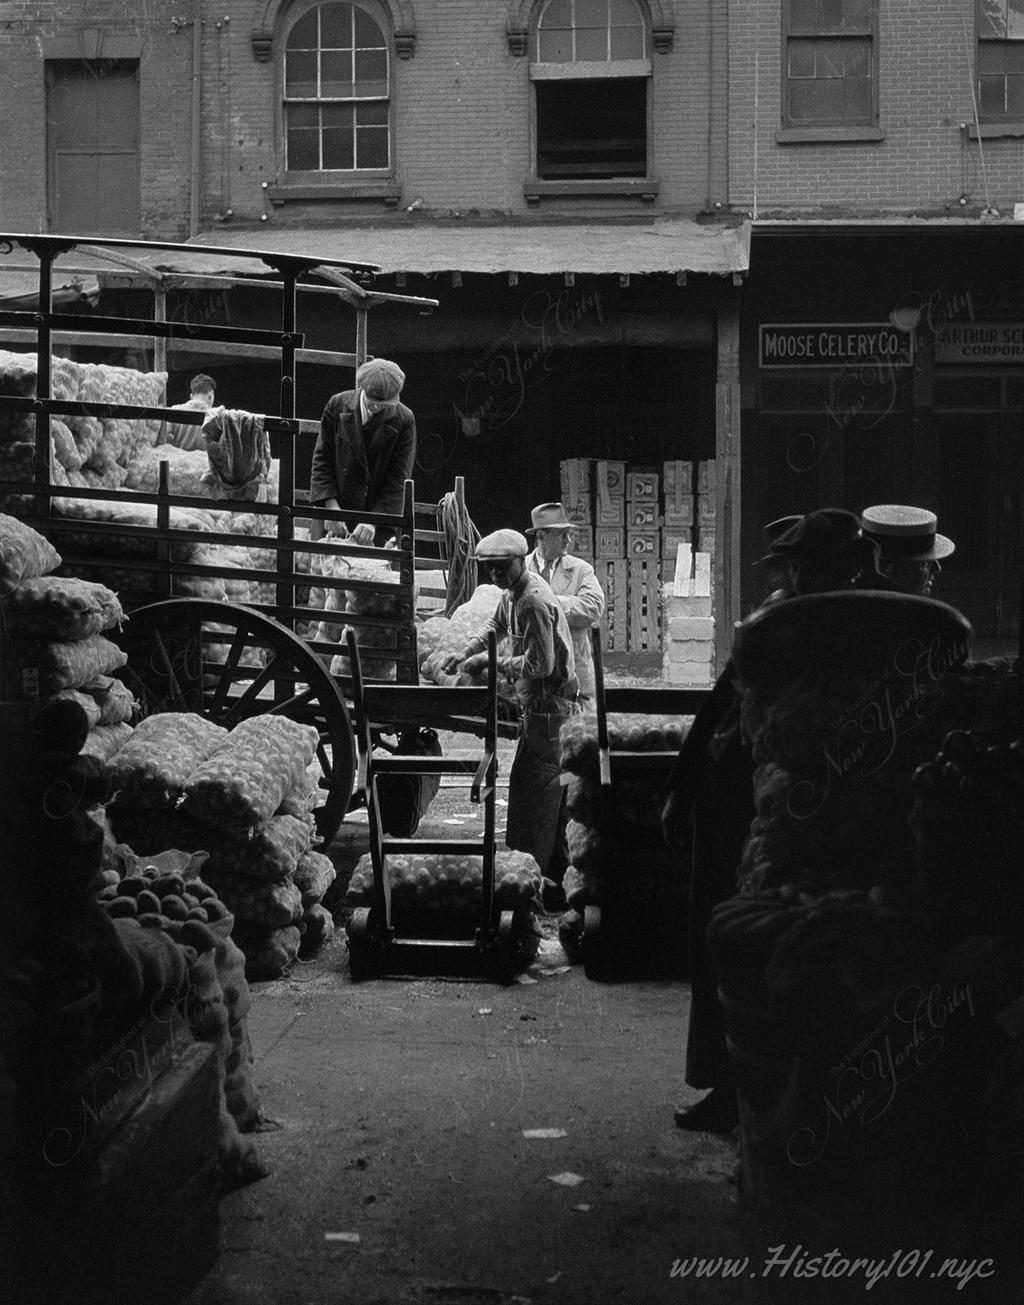 Photograph of workers unloading trucks with dollies at a downtown Manhattan market.